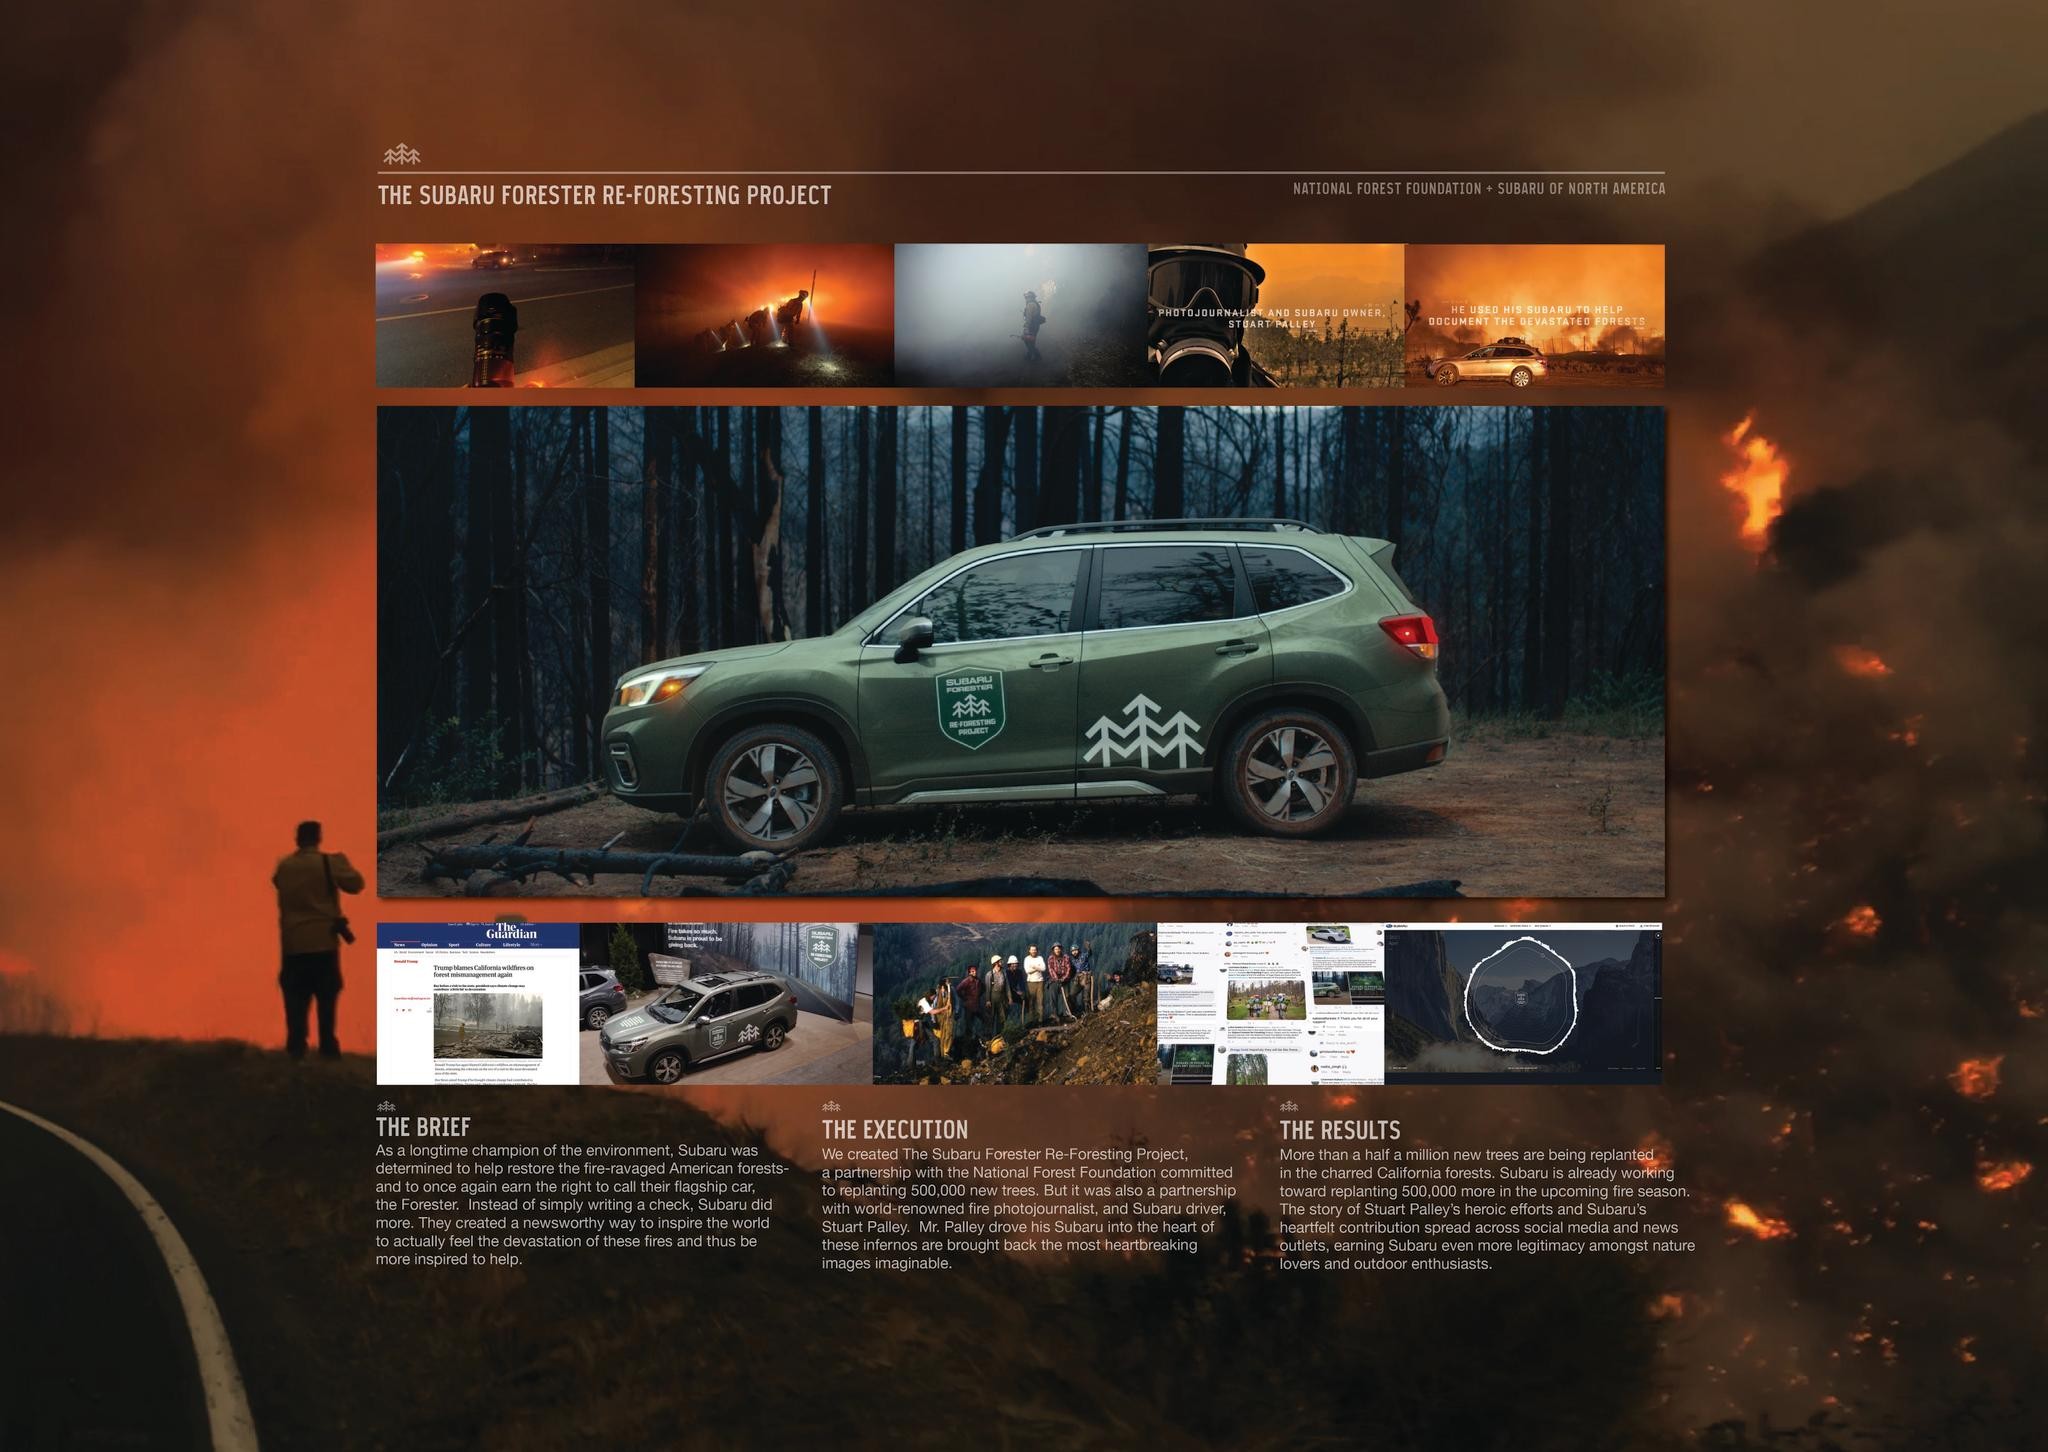 The Subaru Forester Reforesting Project